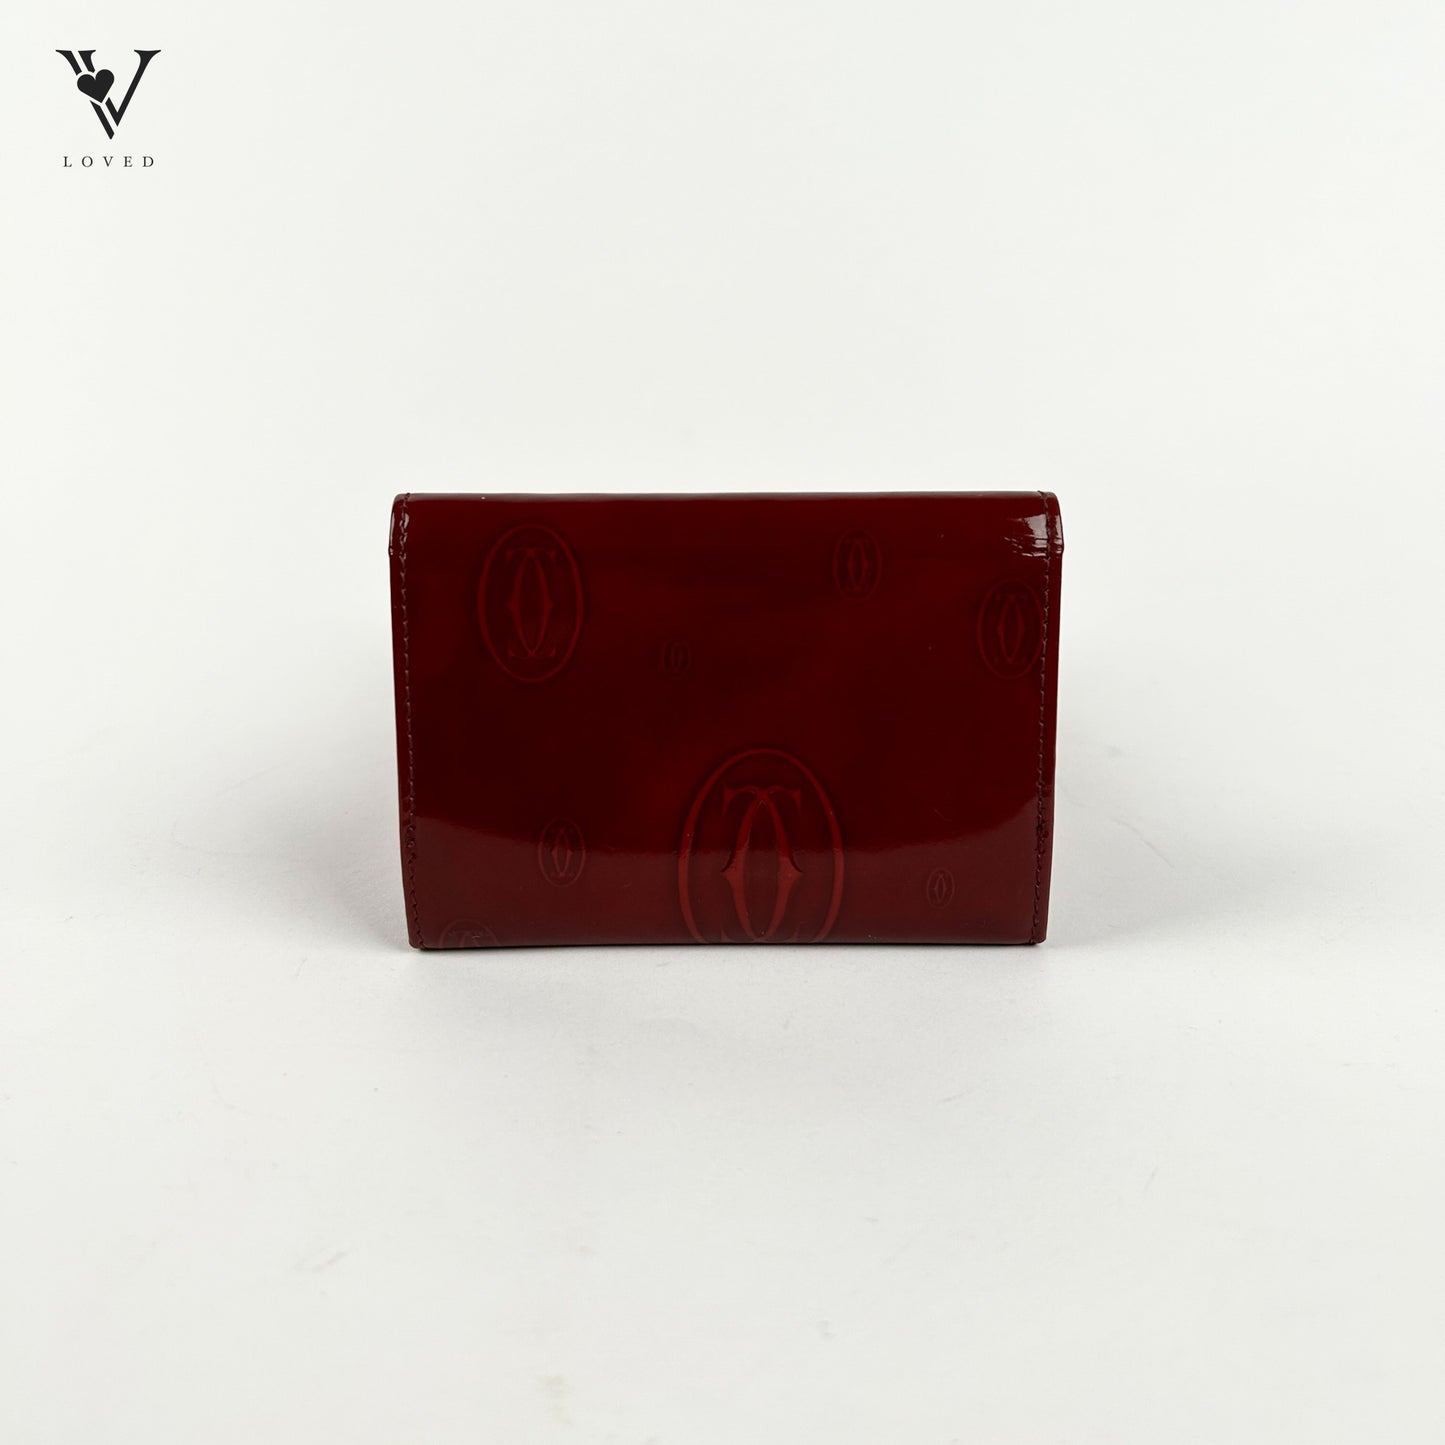 Happy Birthday Bifold Compact Wallet in Red Glossy Leather